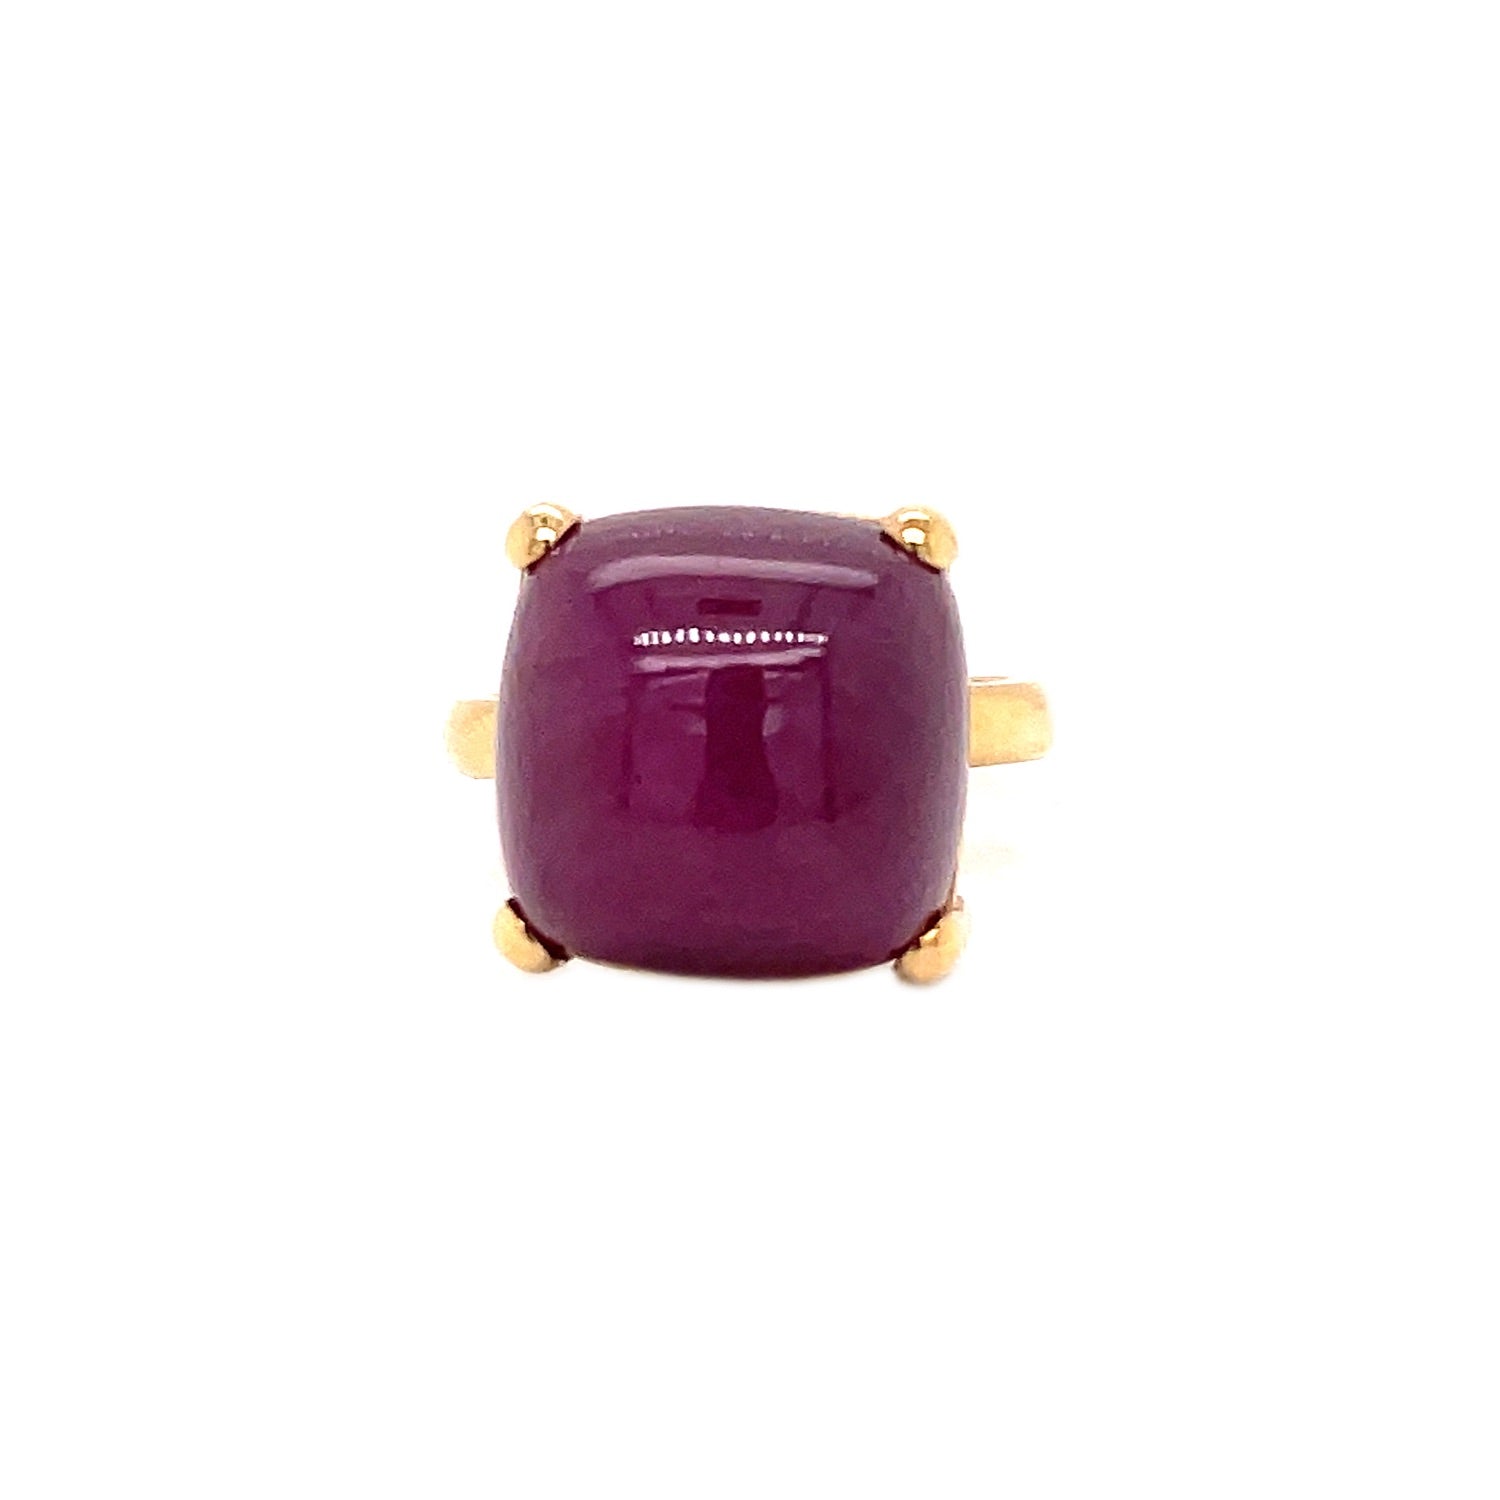 Elegant gold ring with cushion-cut purple gemstone, perfect for occasions.